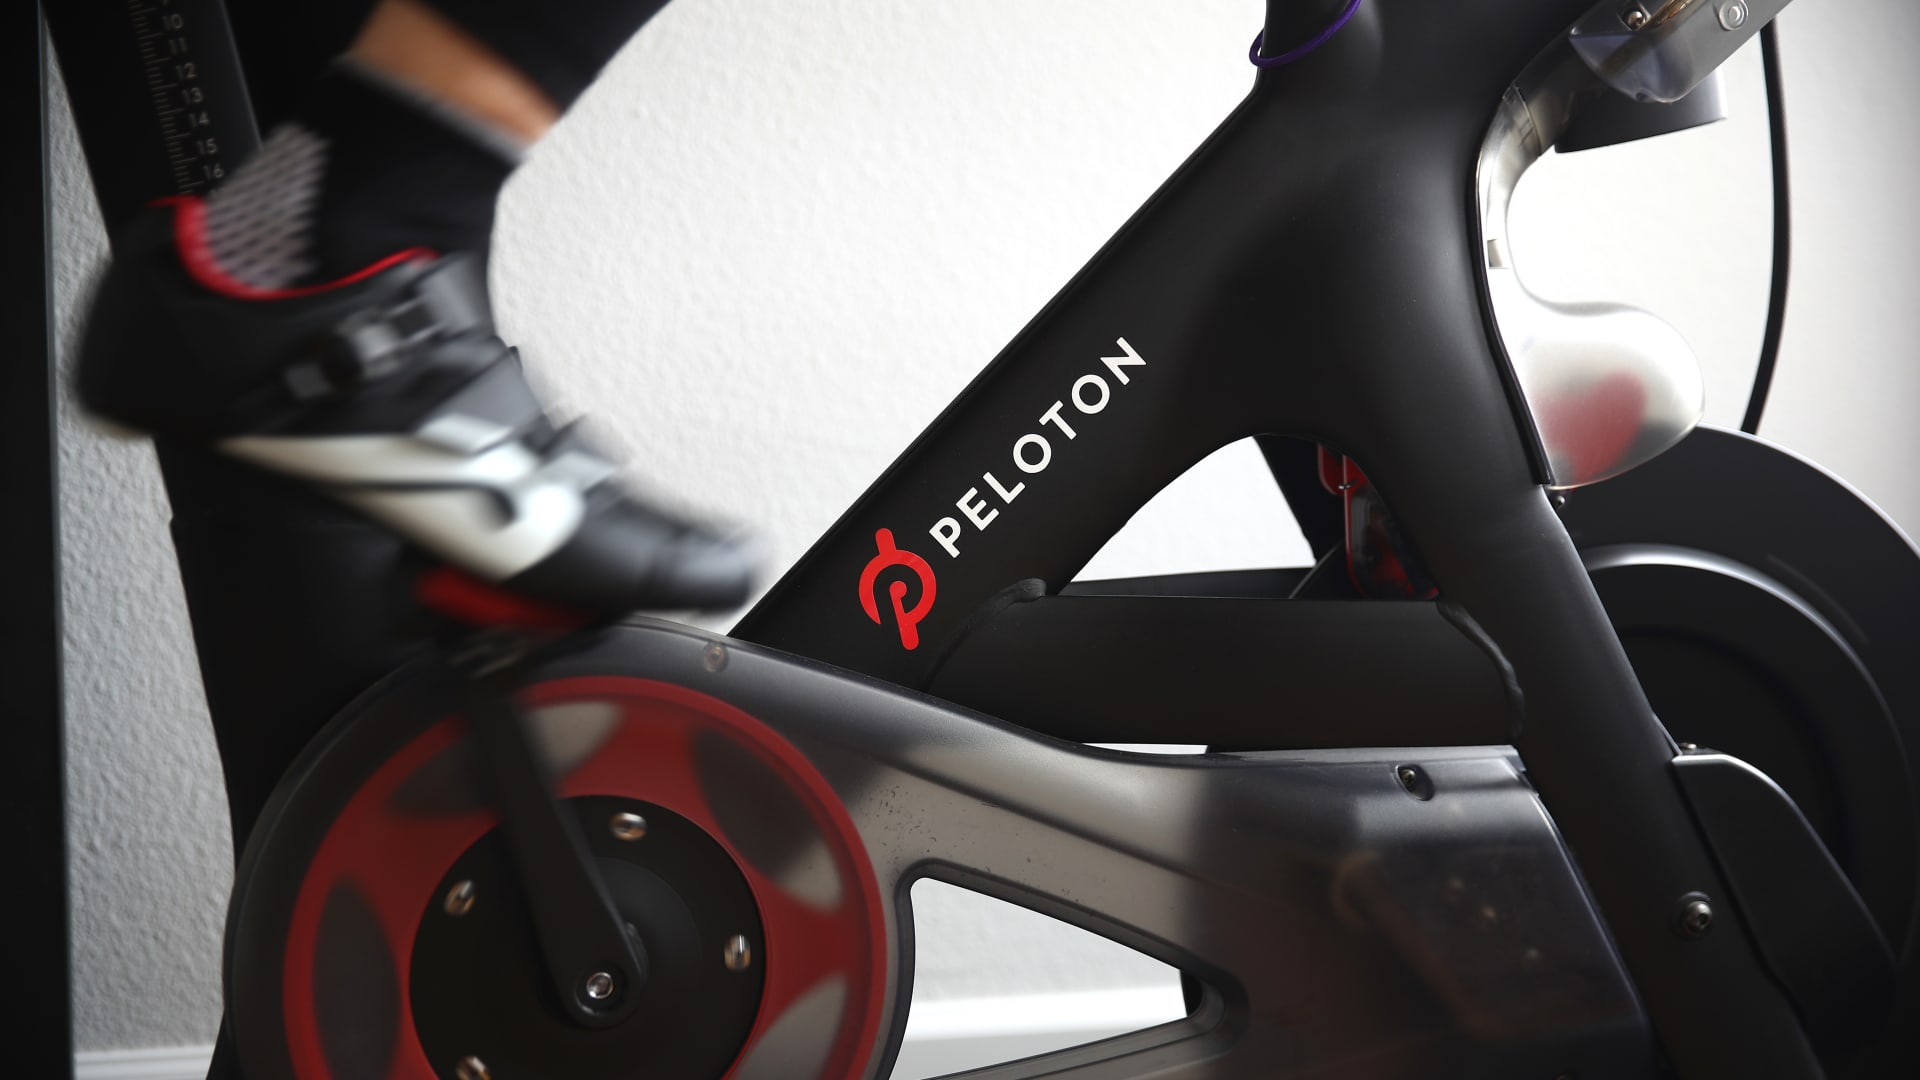 New York man was killed ‘immediately’ by Peloton bike, his family says in lawsuit